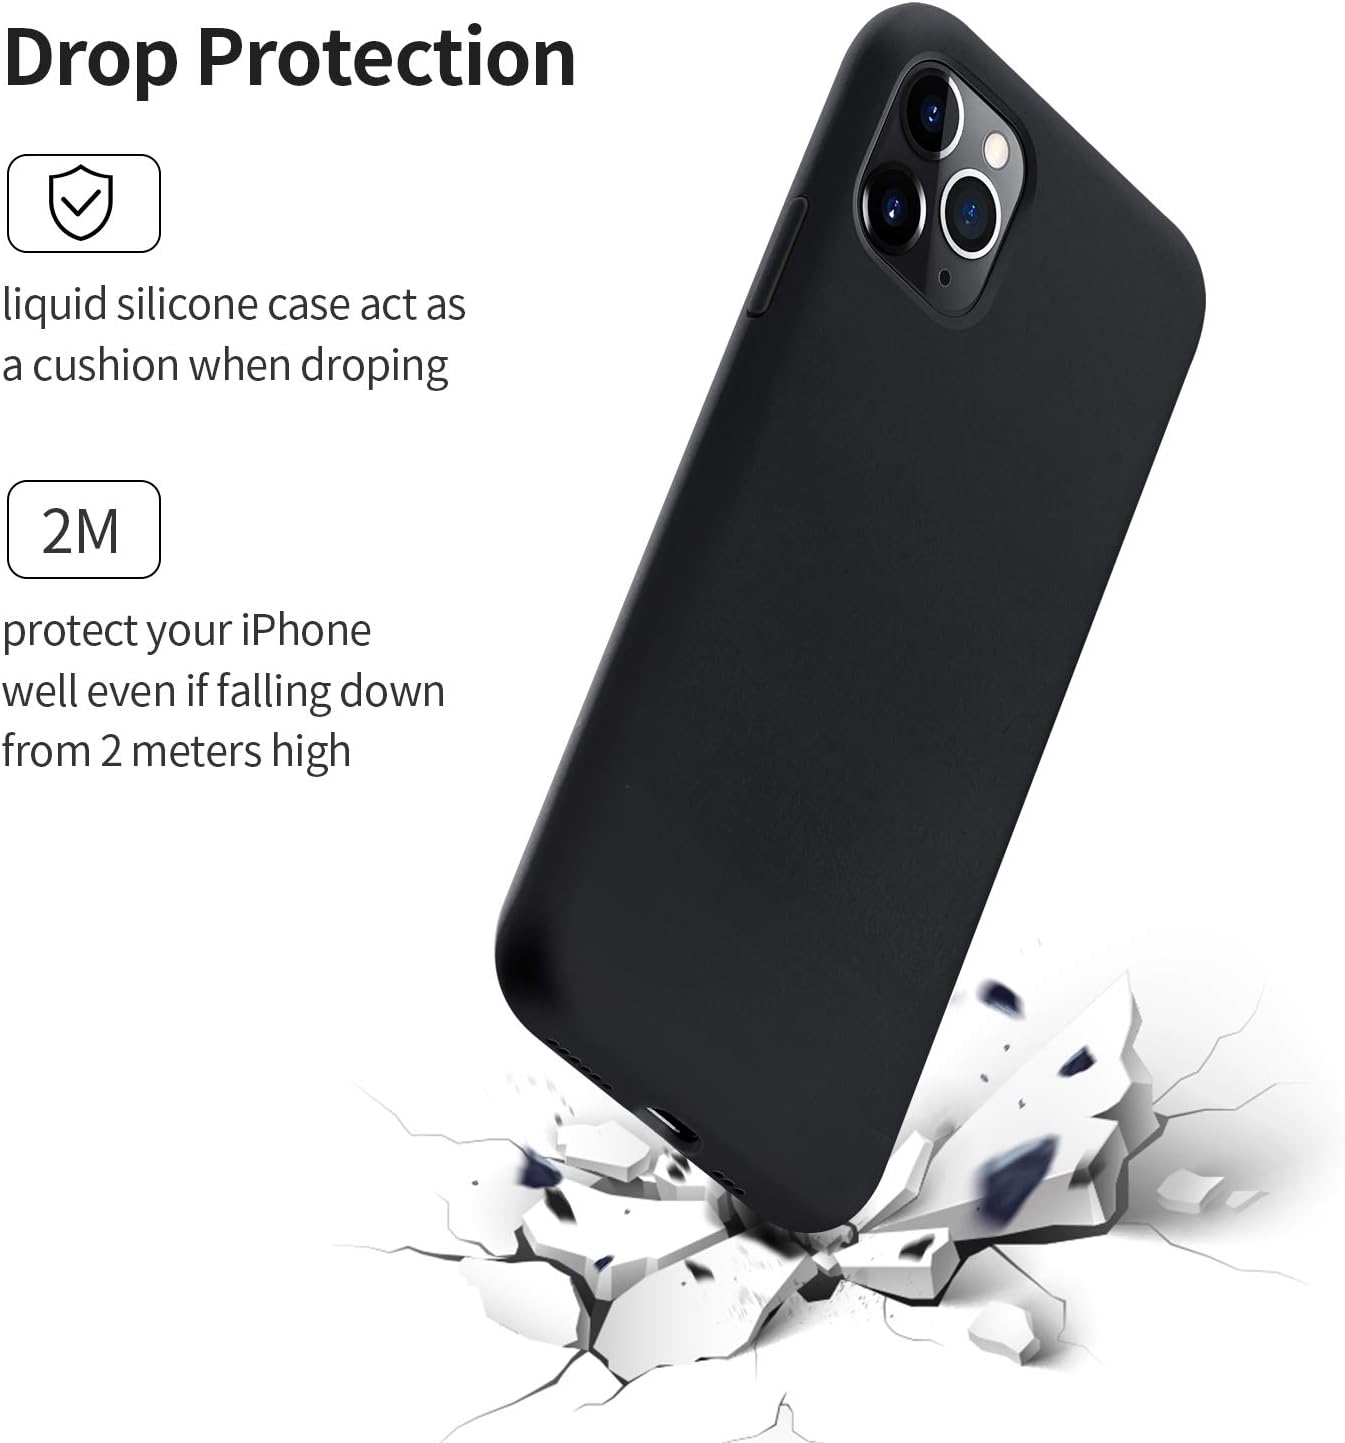 SMARTDEVIL iPhone 11 Pro Max Case+screen protector,[Fully Protective] Liquid Silicone Gel Rubber Shockproof Case Soft Microfiber Cloth Lining Cushion for iPhone 11 Pro Max- Black